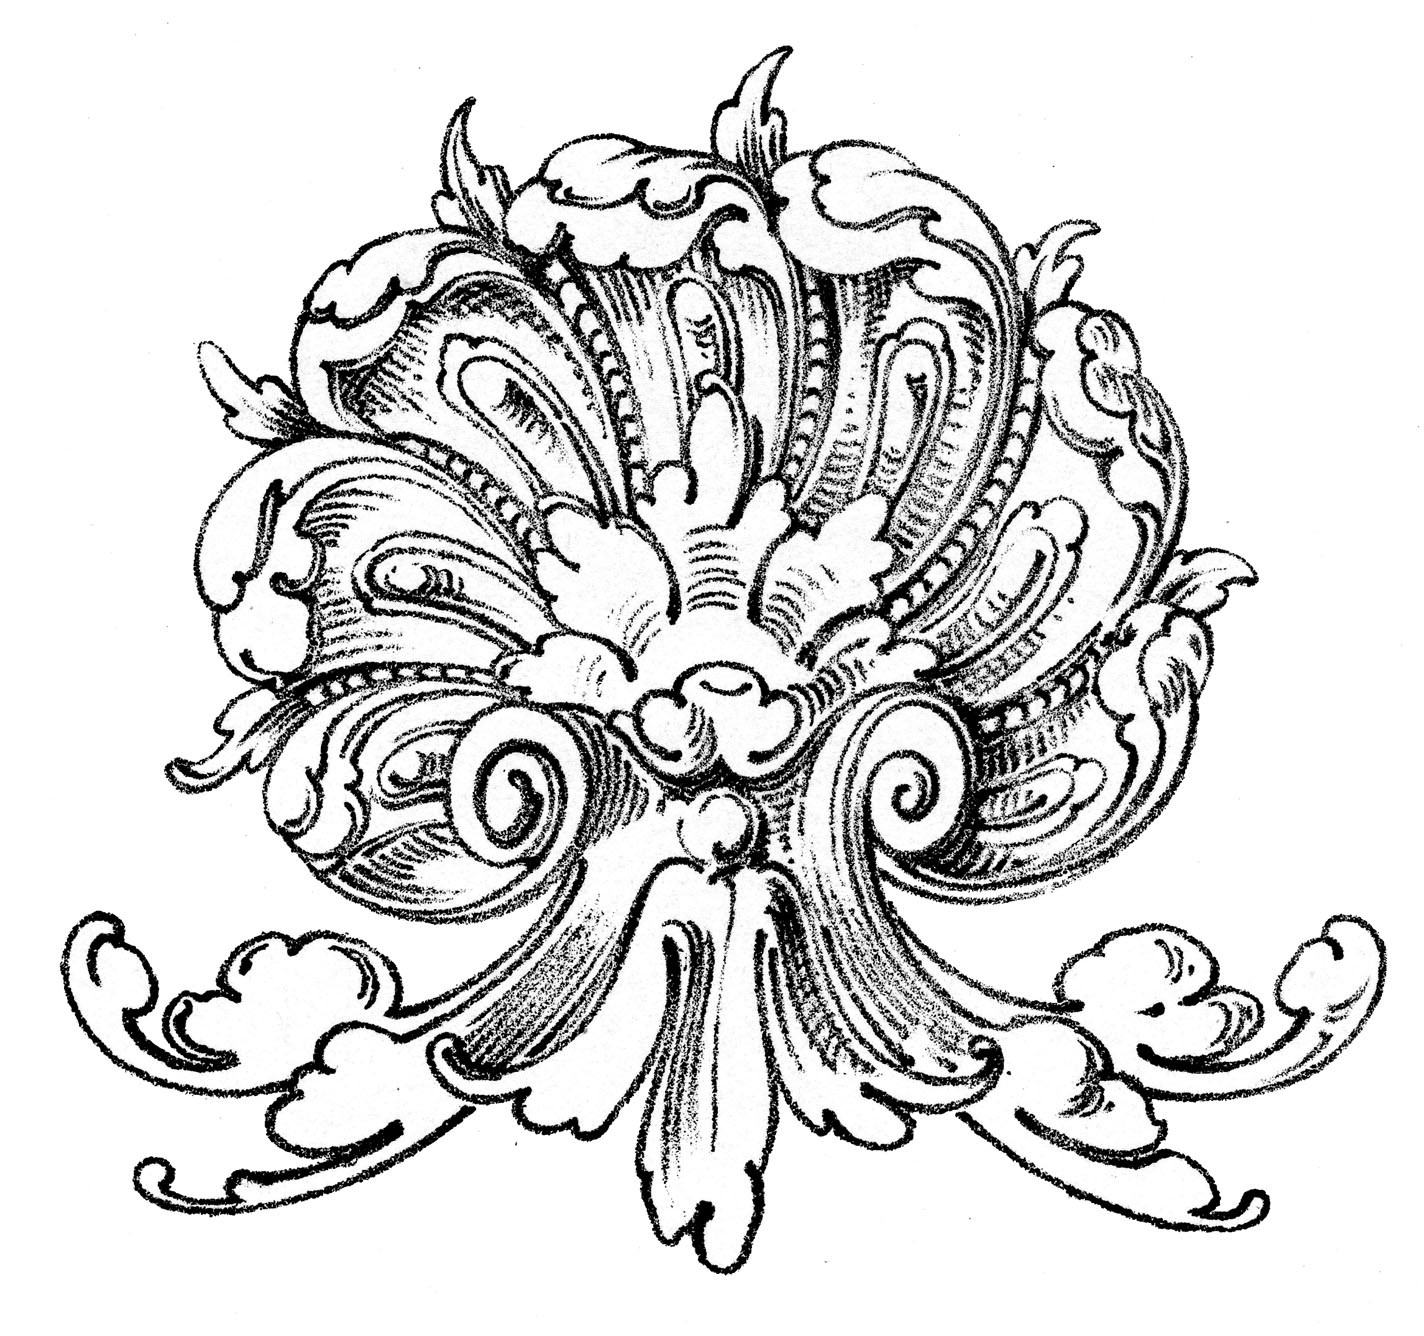 Vintage Ornamental Clip Art   Shell With Scrolls   The Graphics Fairy